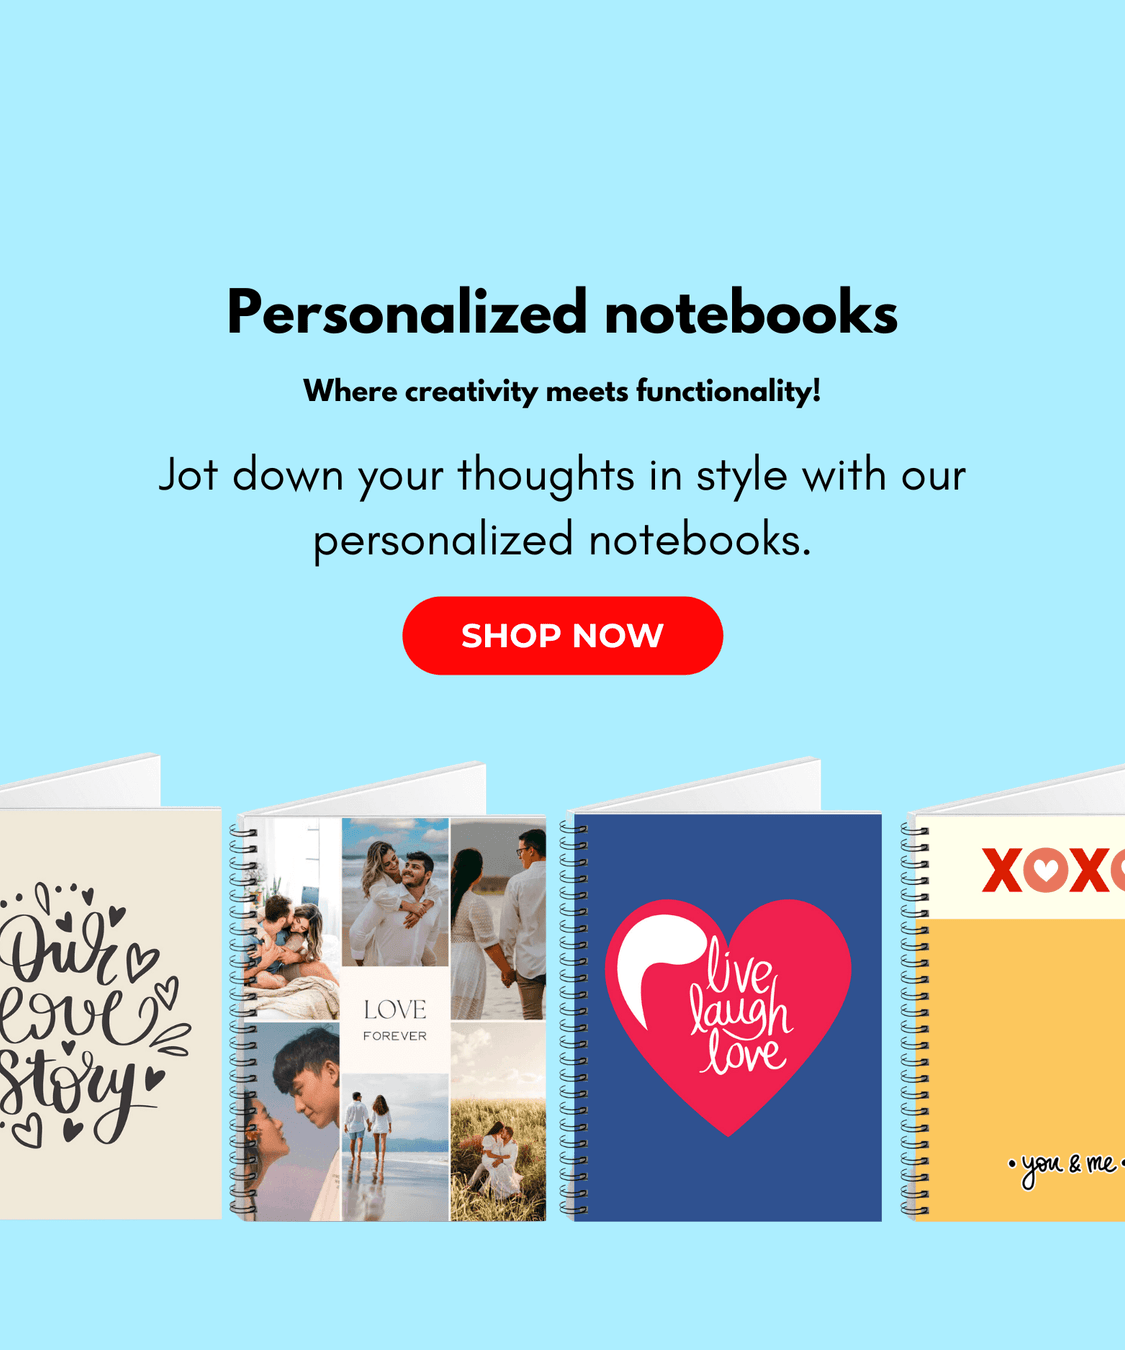 Jot down your thoughts in style with our personalized notebooks.